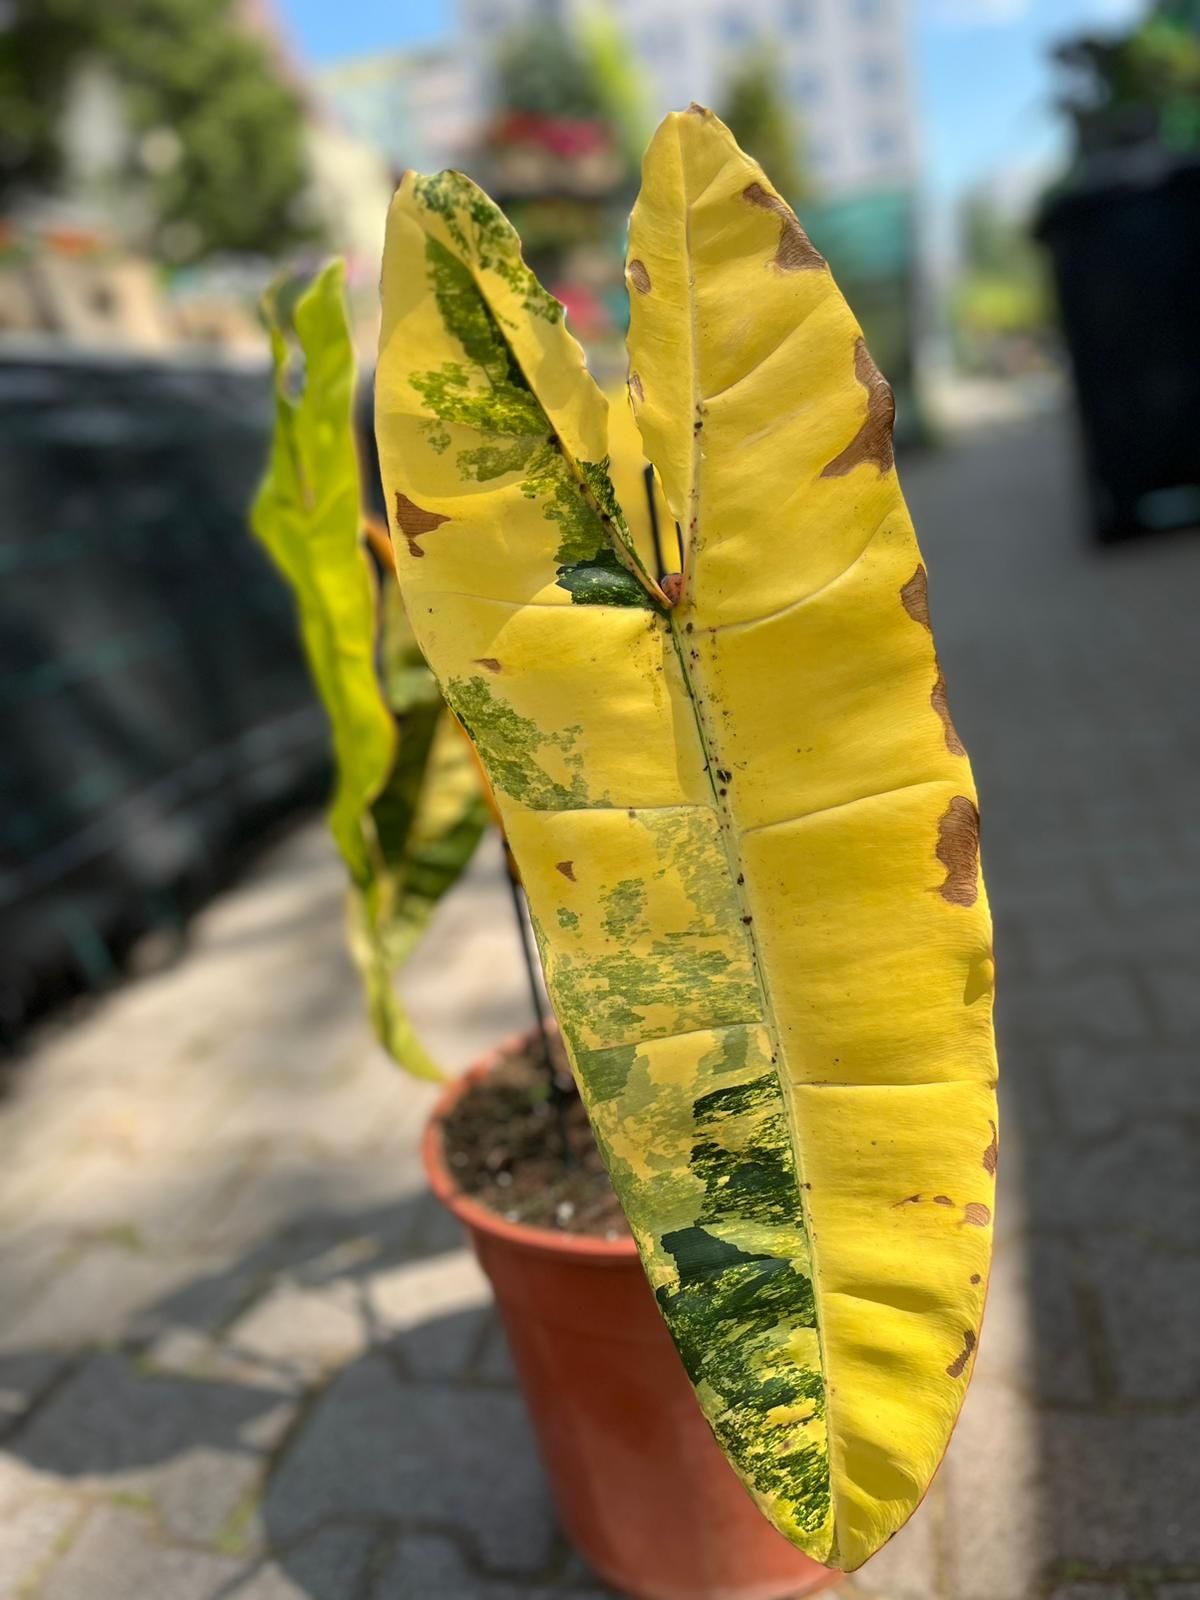 PhiPhilodendron Billietiae Variegated